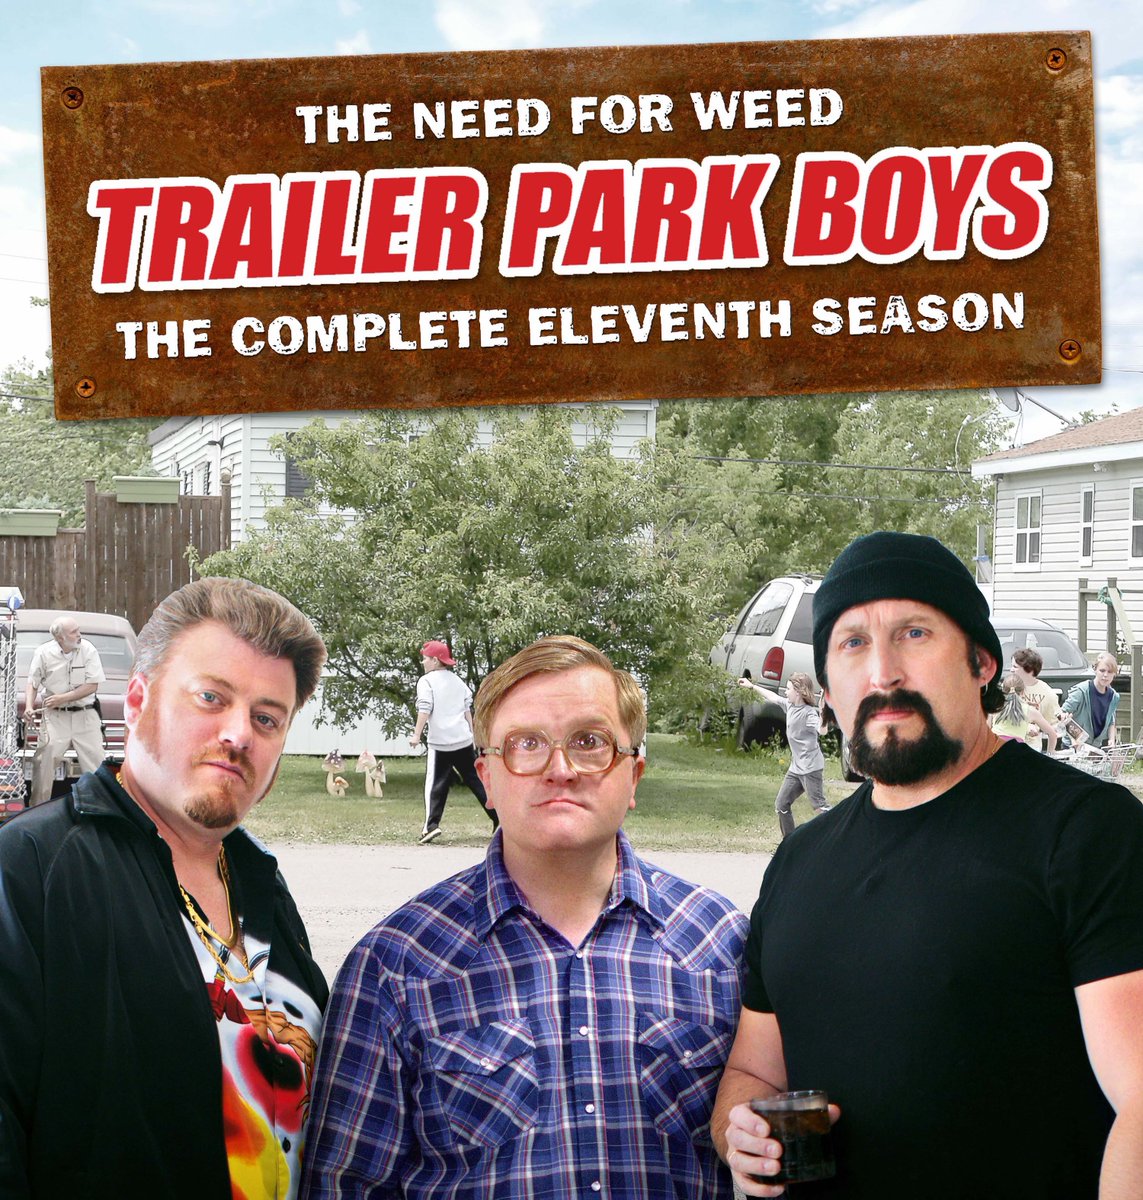 GREASY BREAKING NEWS: Trailer Park Boys Season 11 to be unleashed on @netflix FRIDAY MARCH 31! #TPB11 #DECENT